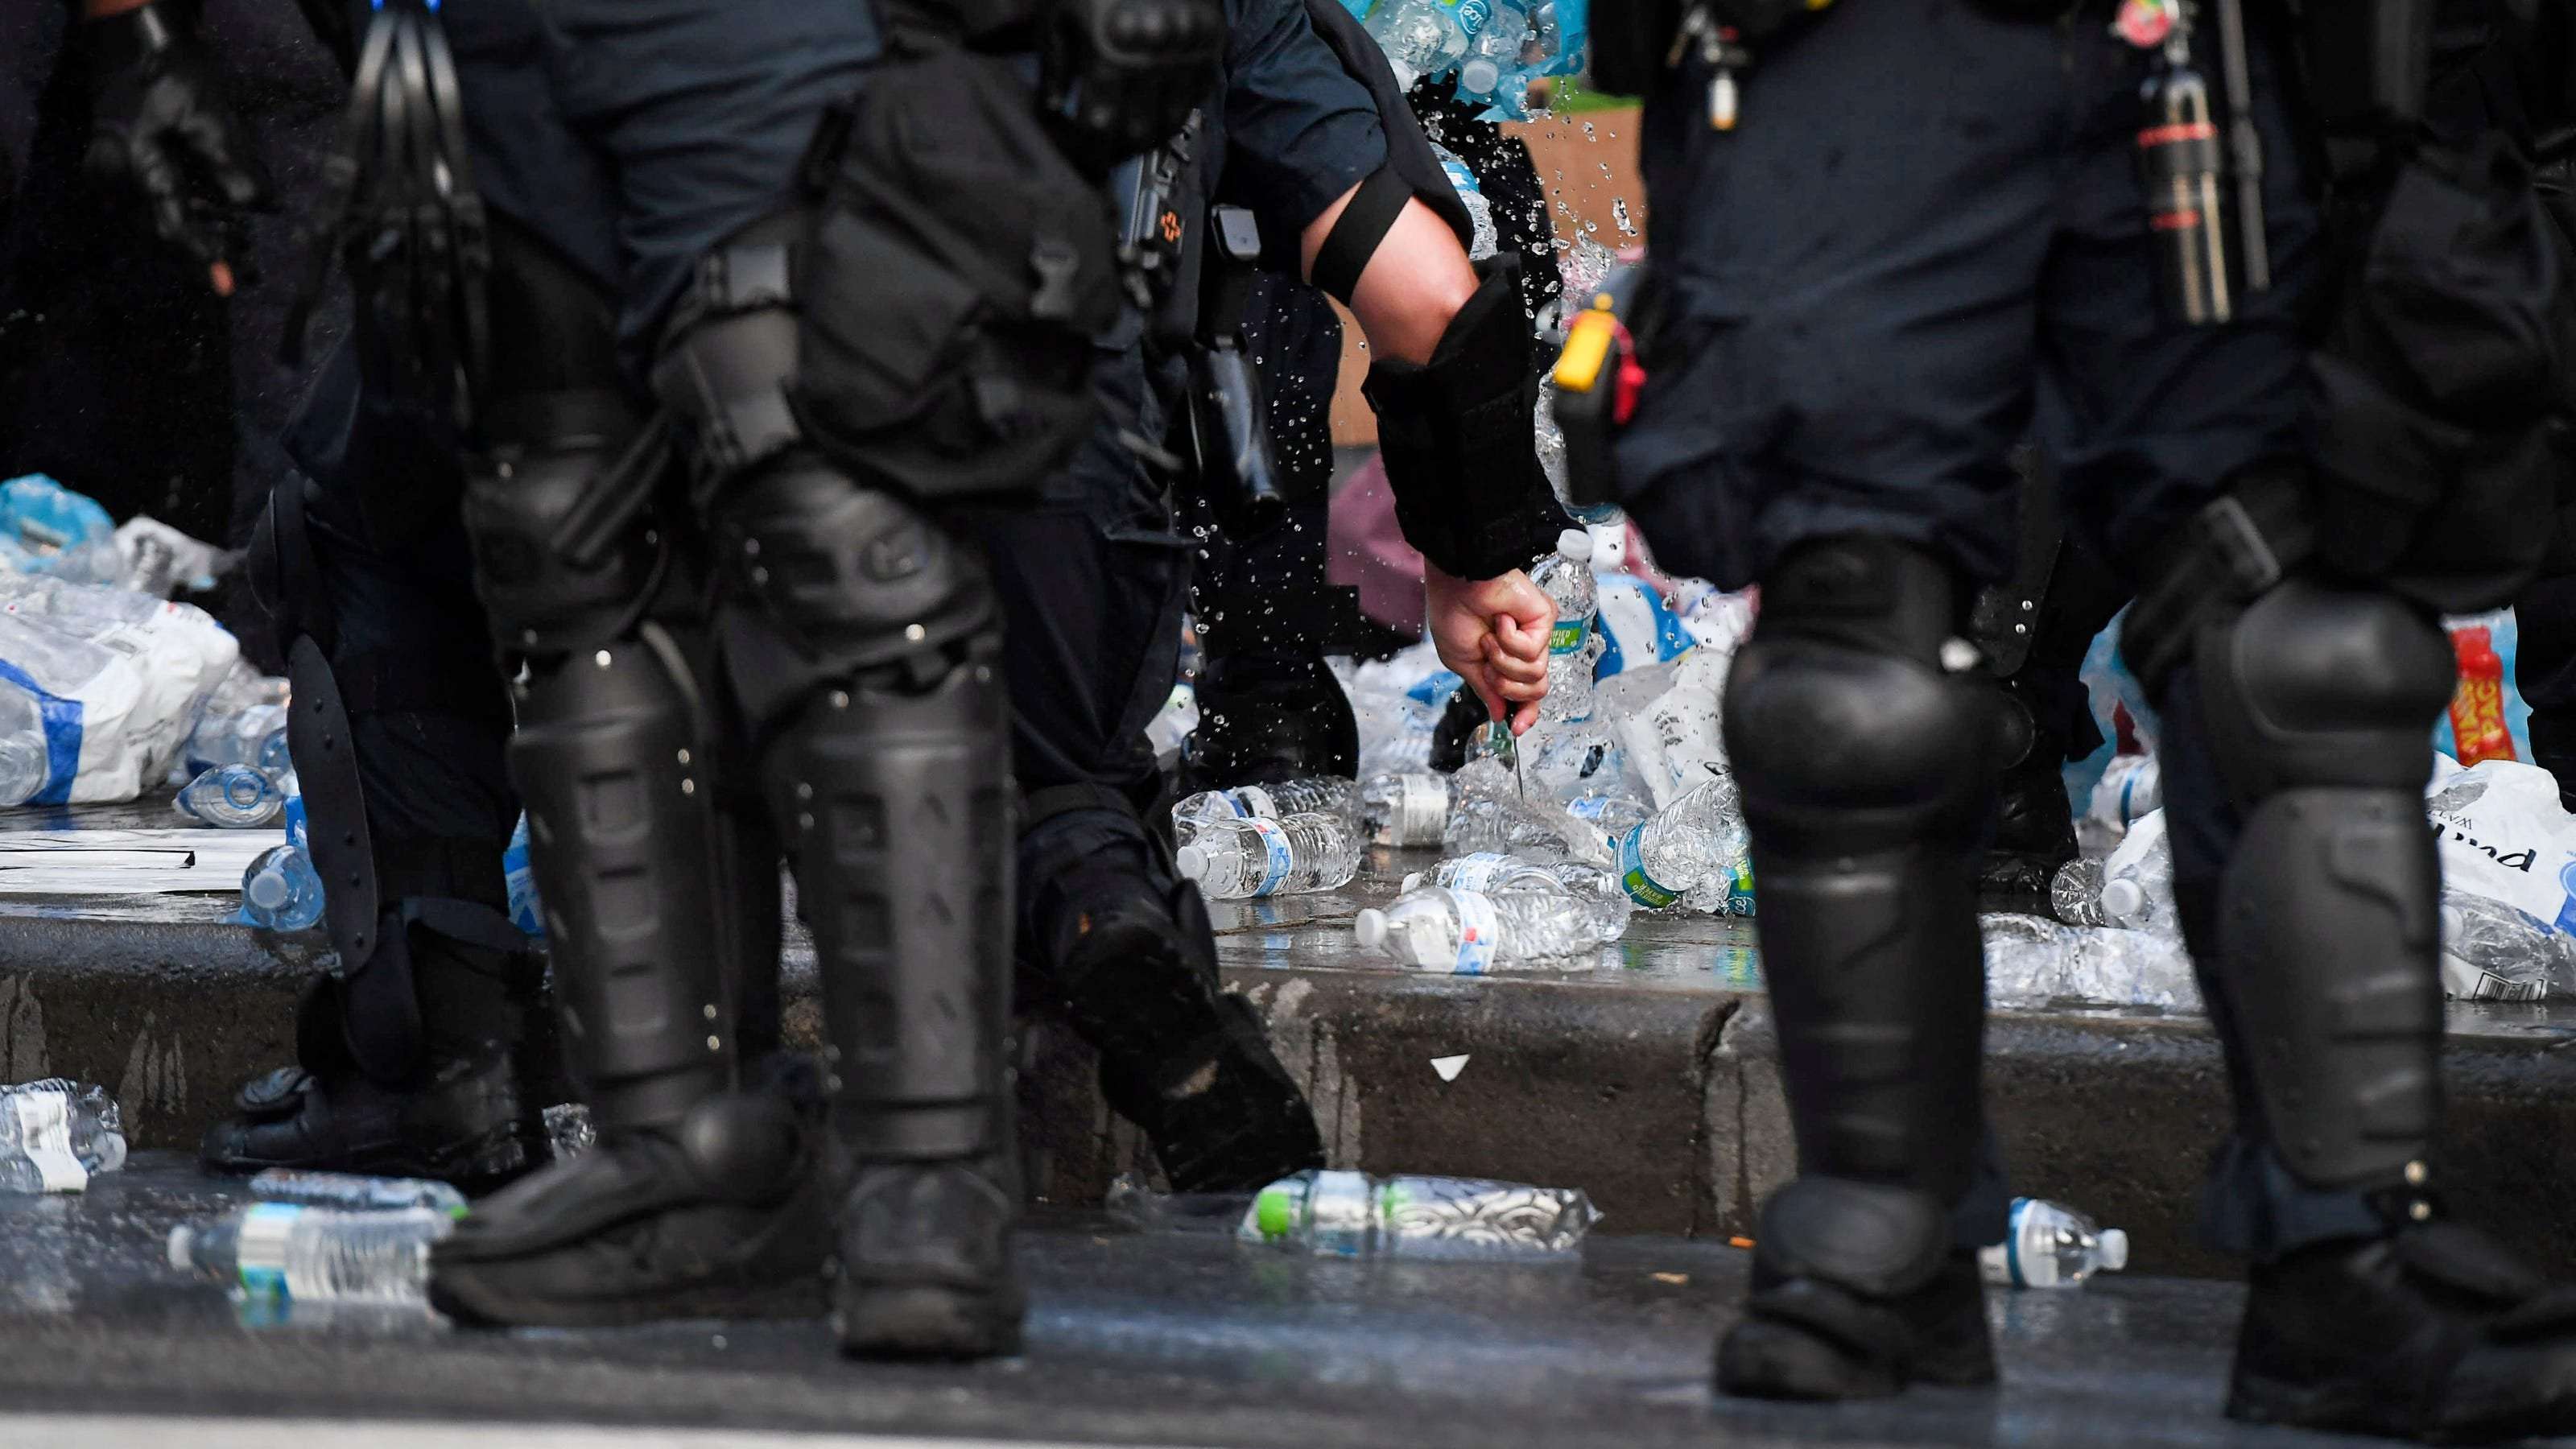 image for Asheville, North Carolina, police seen destroying protesters' supplies